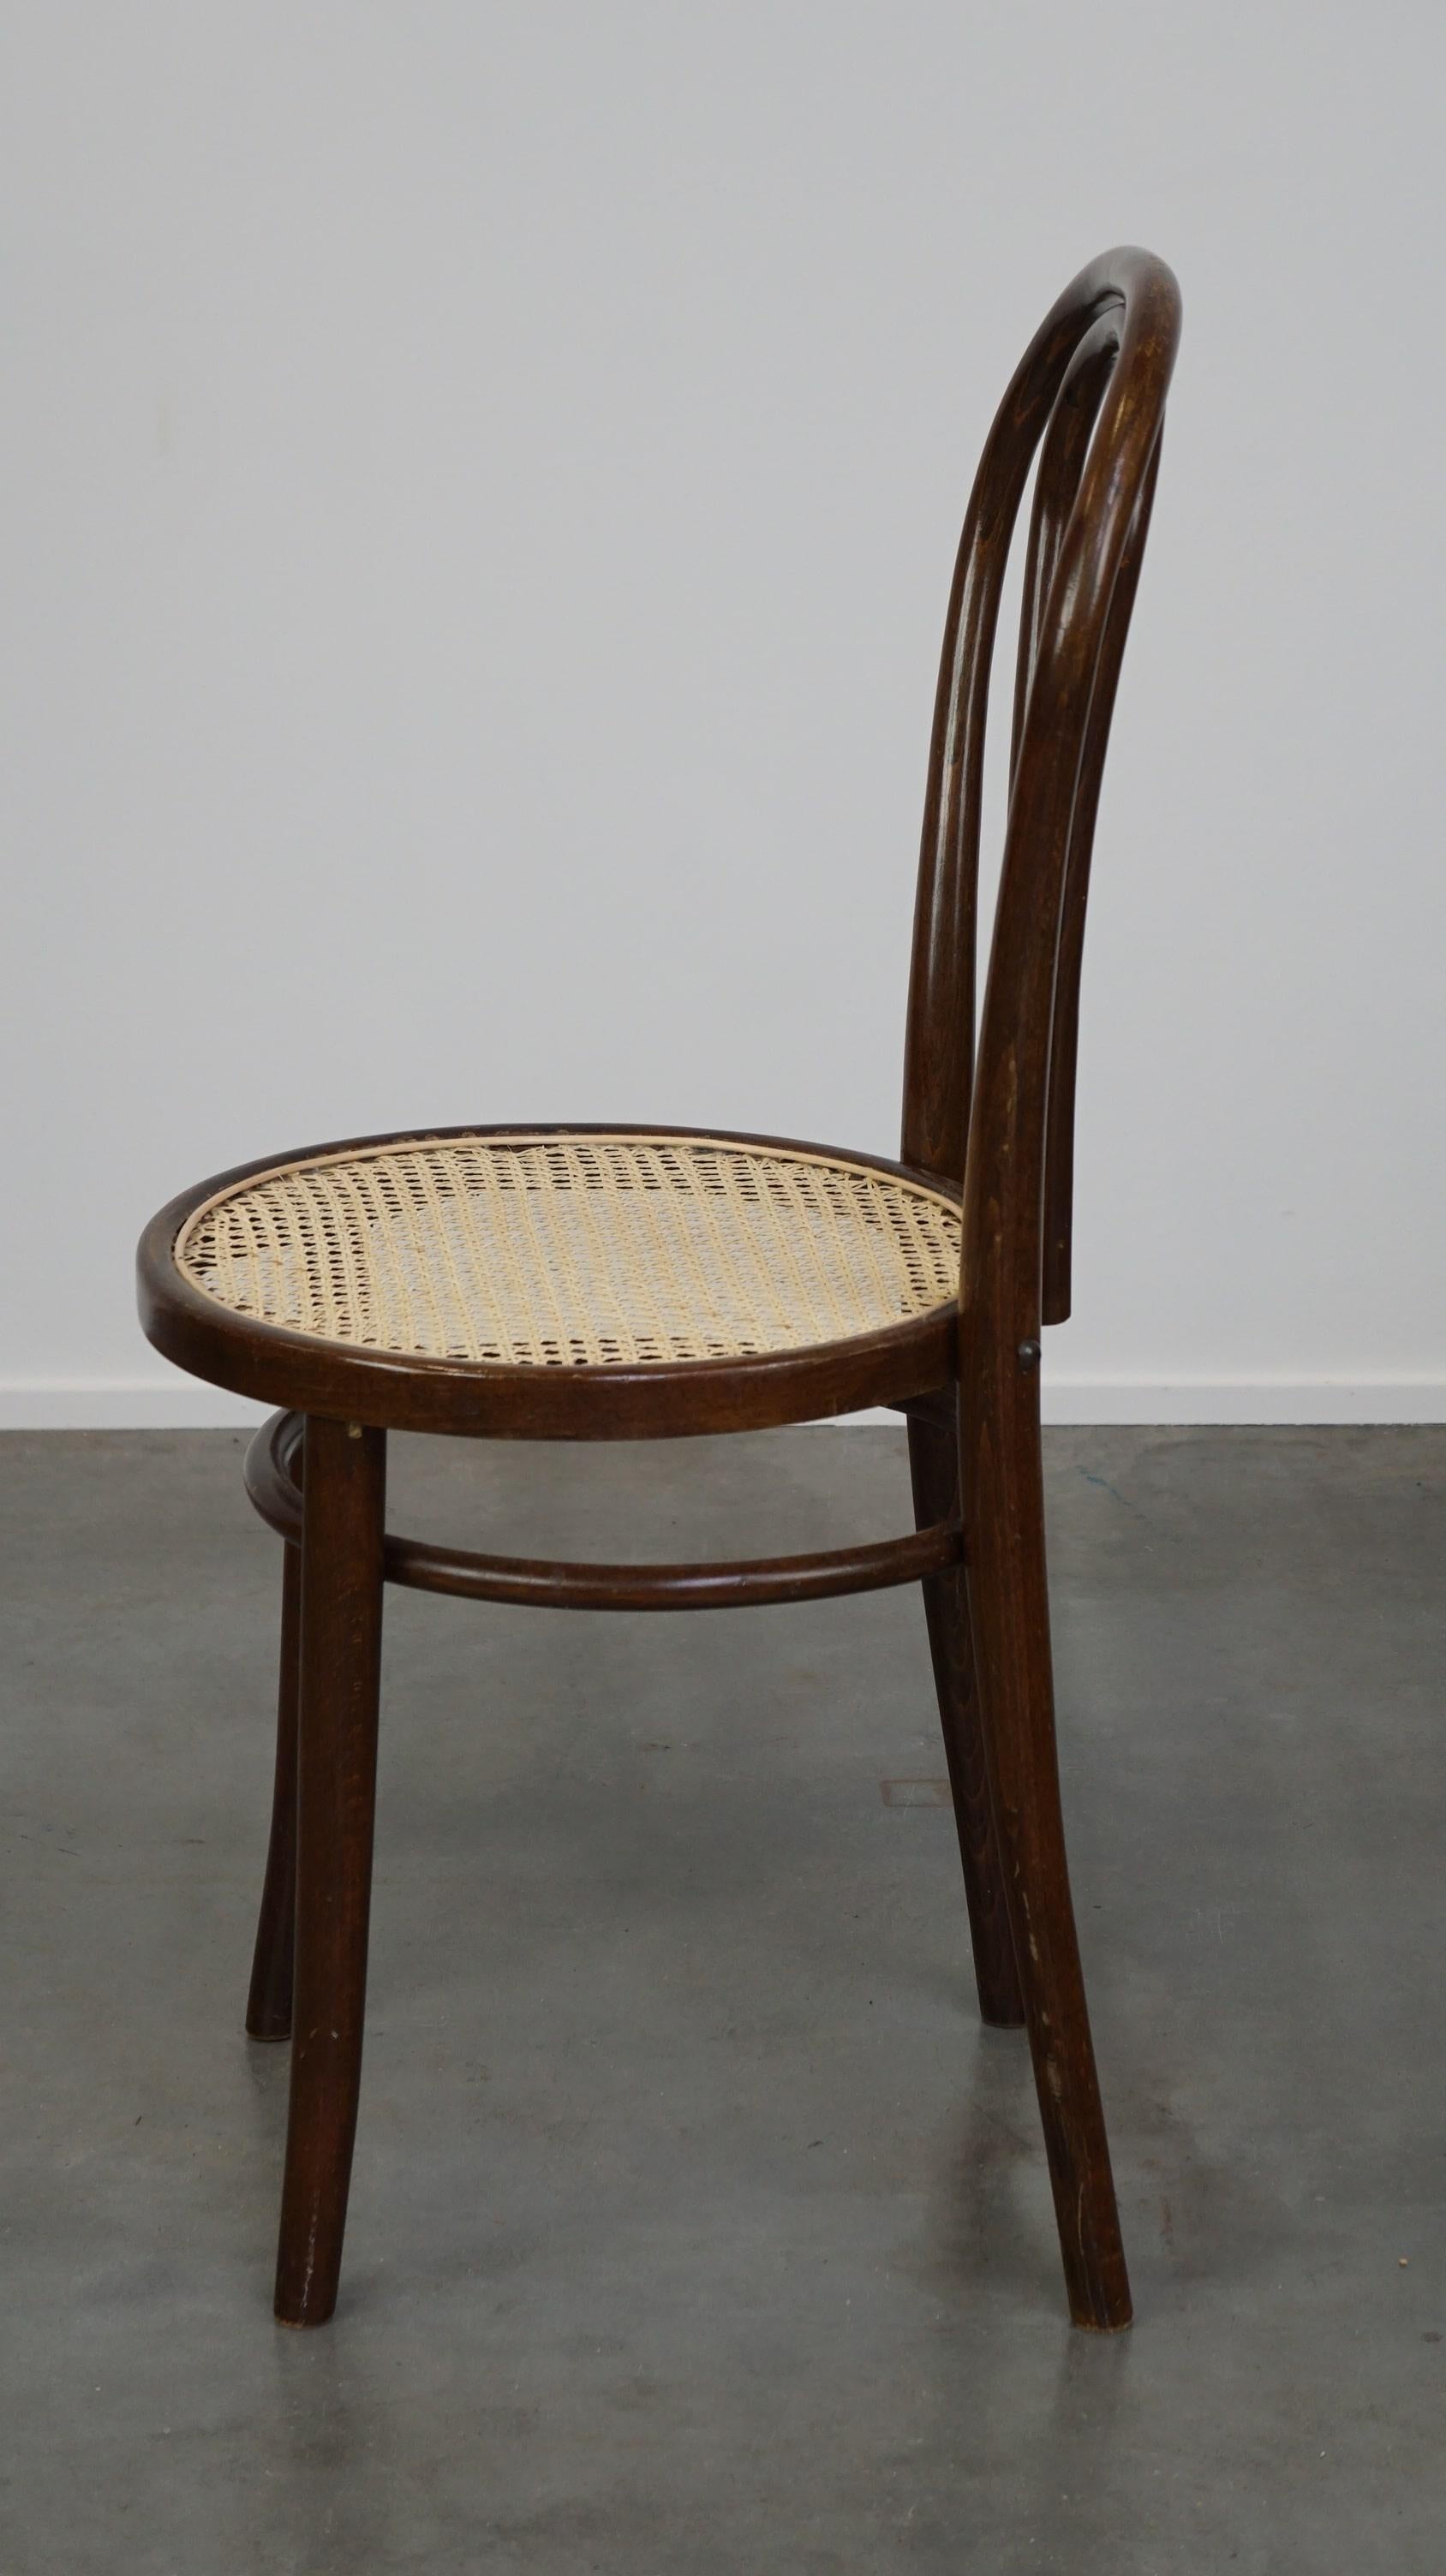 Wicker Original antique bentwood Thonet chair model no. 18 with a new woven seat For Sale